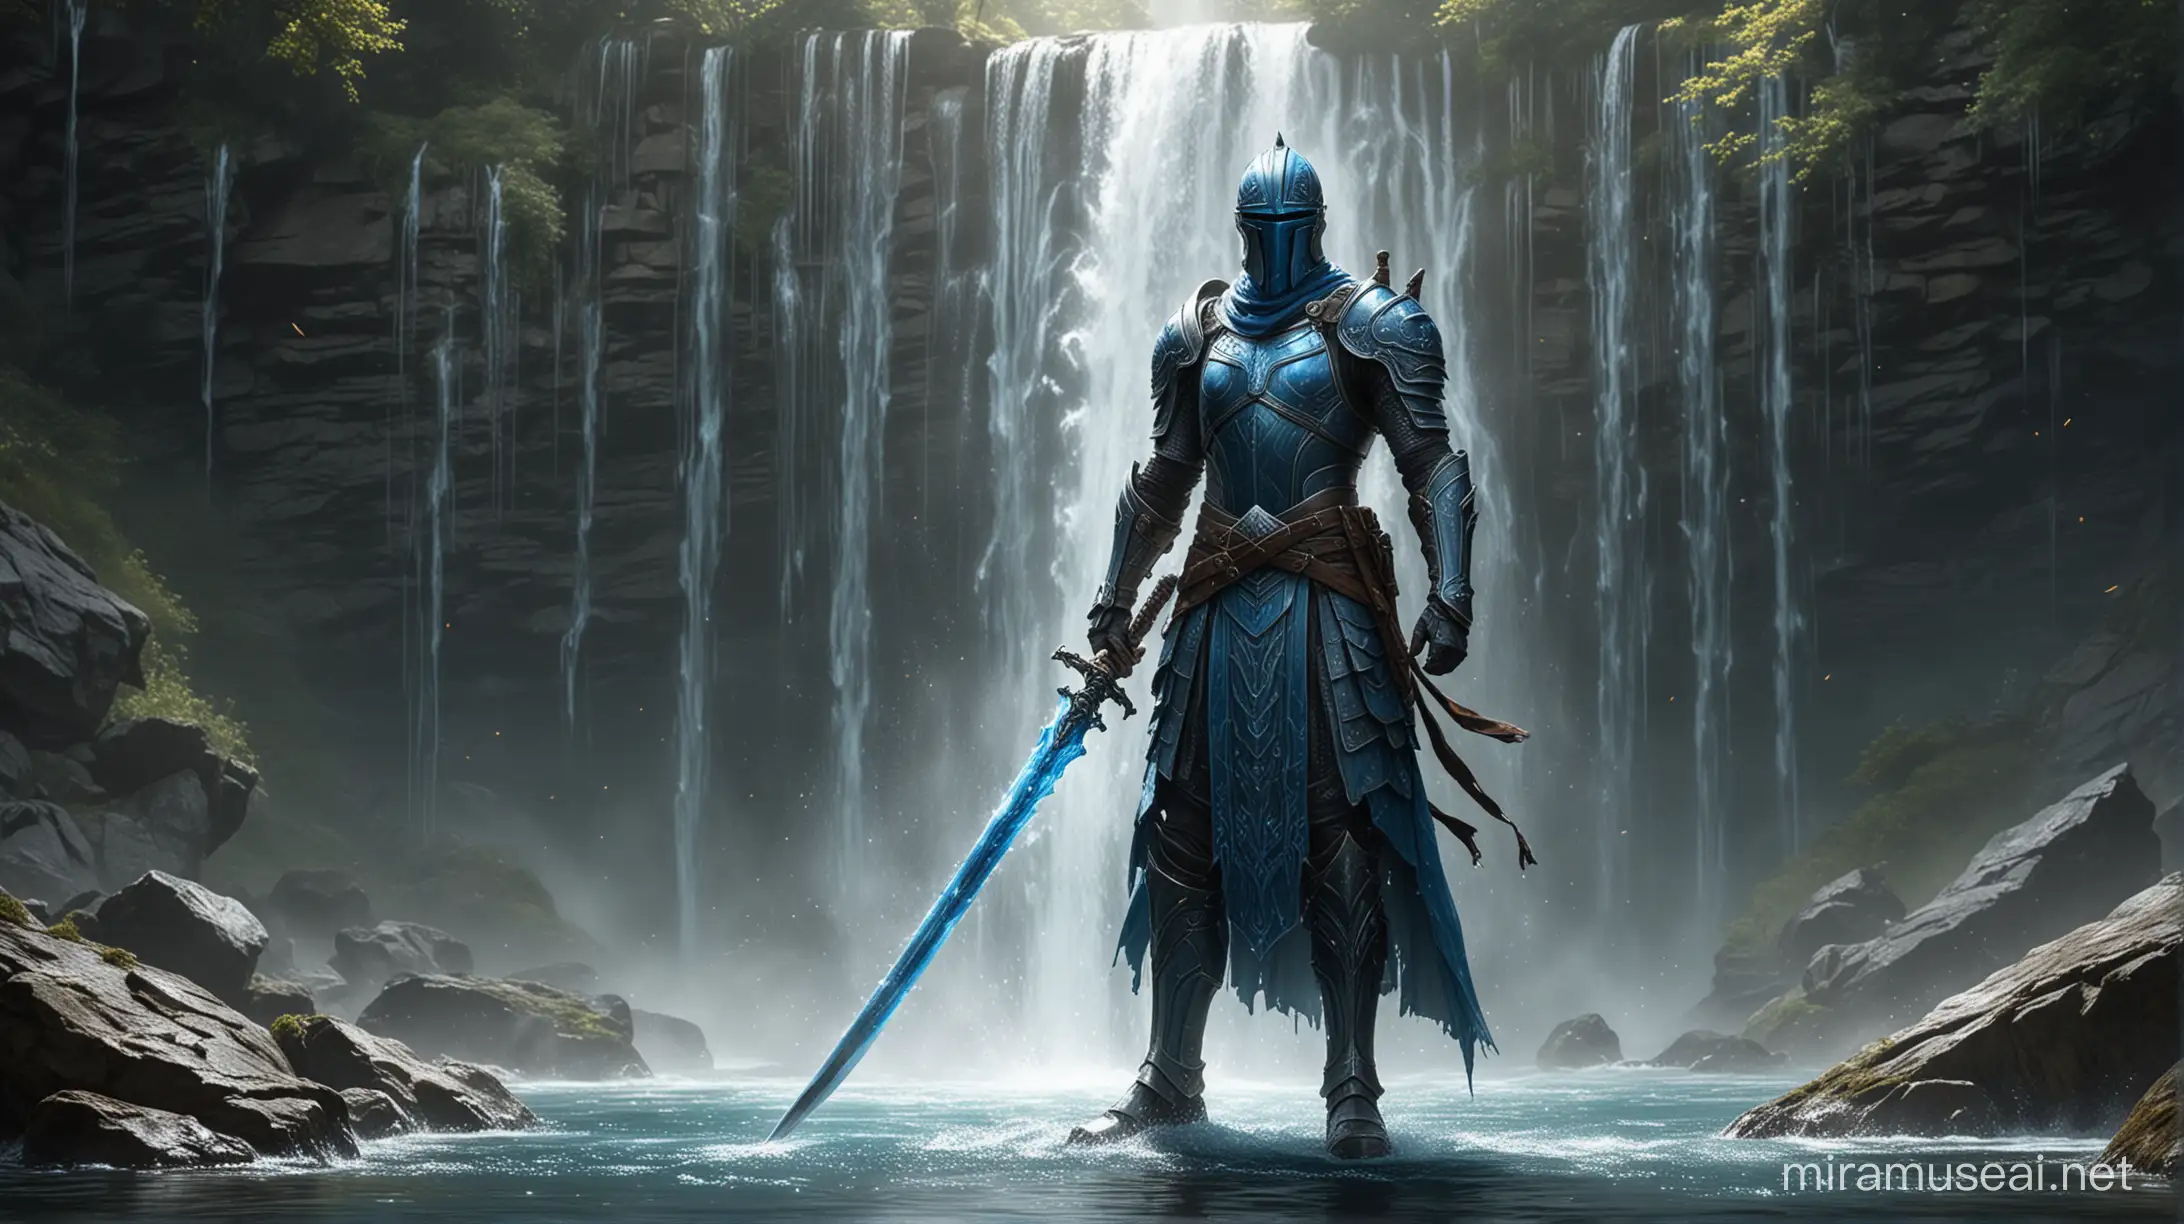 A majestic Waterbender Knight stands proudly in front of a cascading waterfall, wielding a shimmering blue water sword. The intricate details of the knight's armor and flowing robes are captured with sharp lines and sharp focus, creating an ultra-realistic full body shot. Every element of the image is meticulously rendered, from the delicate water droplets hanging in the air to the reflections of light dancing on the sword's blade. This stunning painting immerses viewers in a world of fantasy and battle, where water and steel merge in a breathtaking display of artistic skills.

